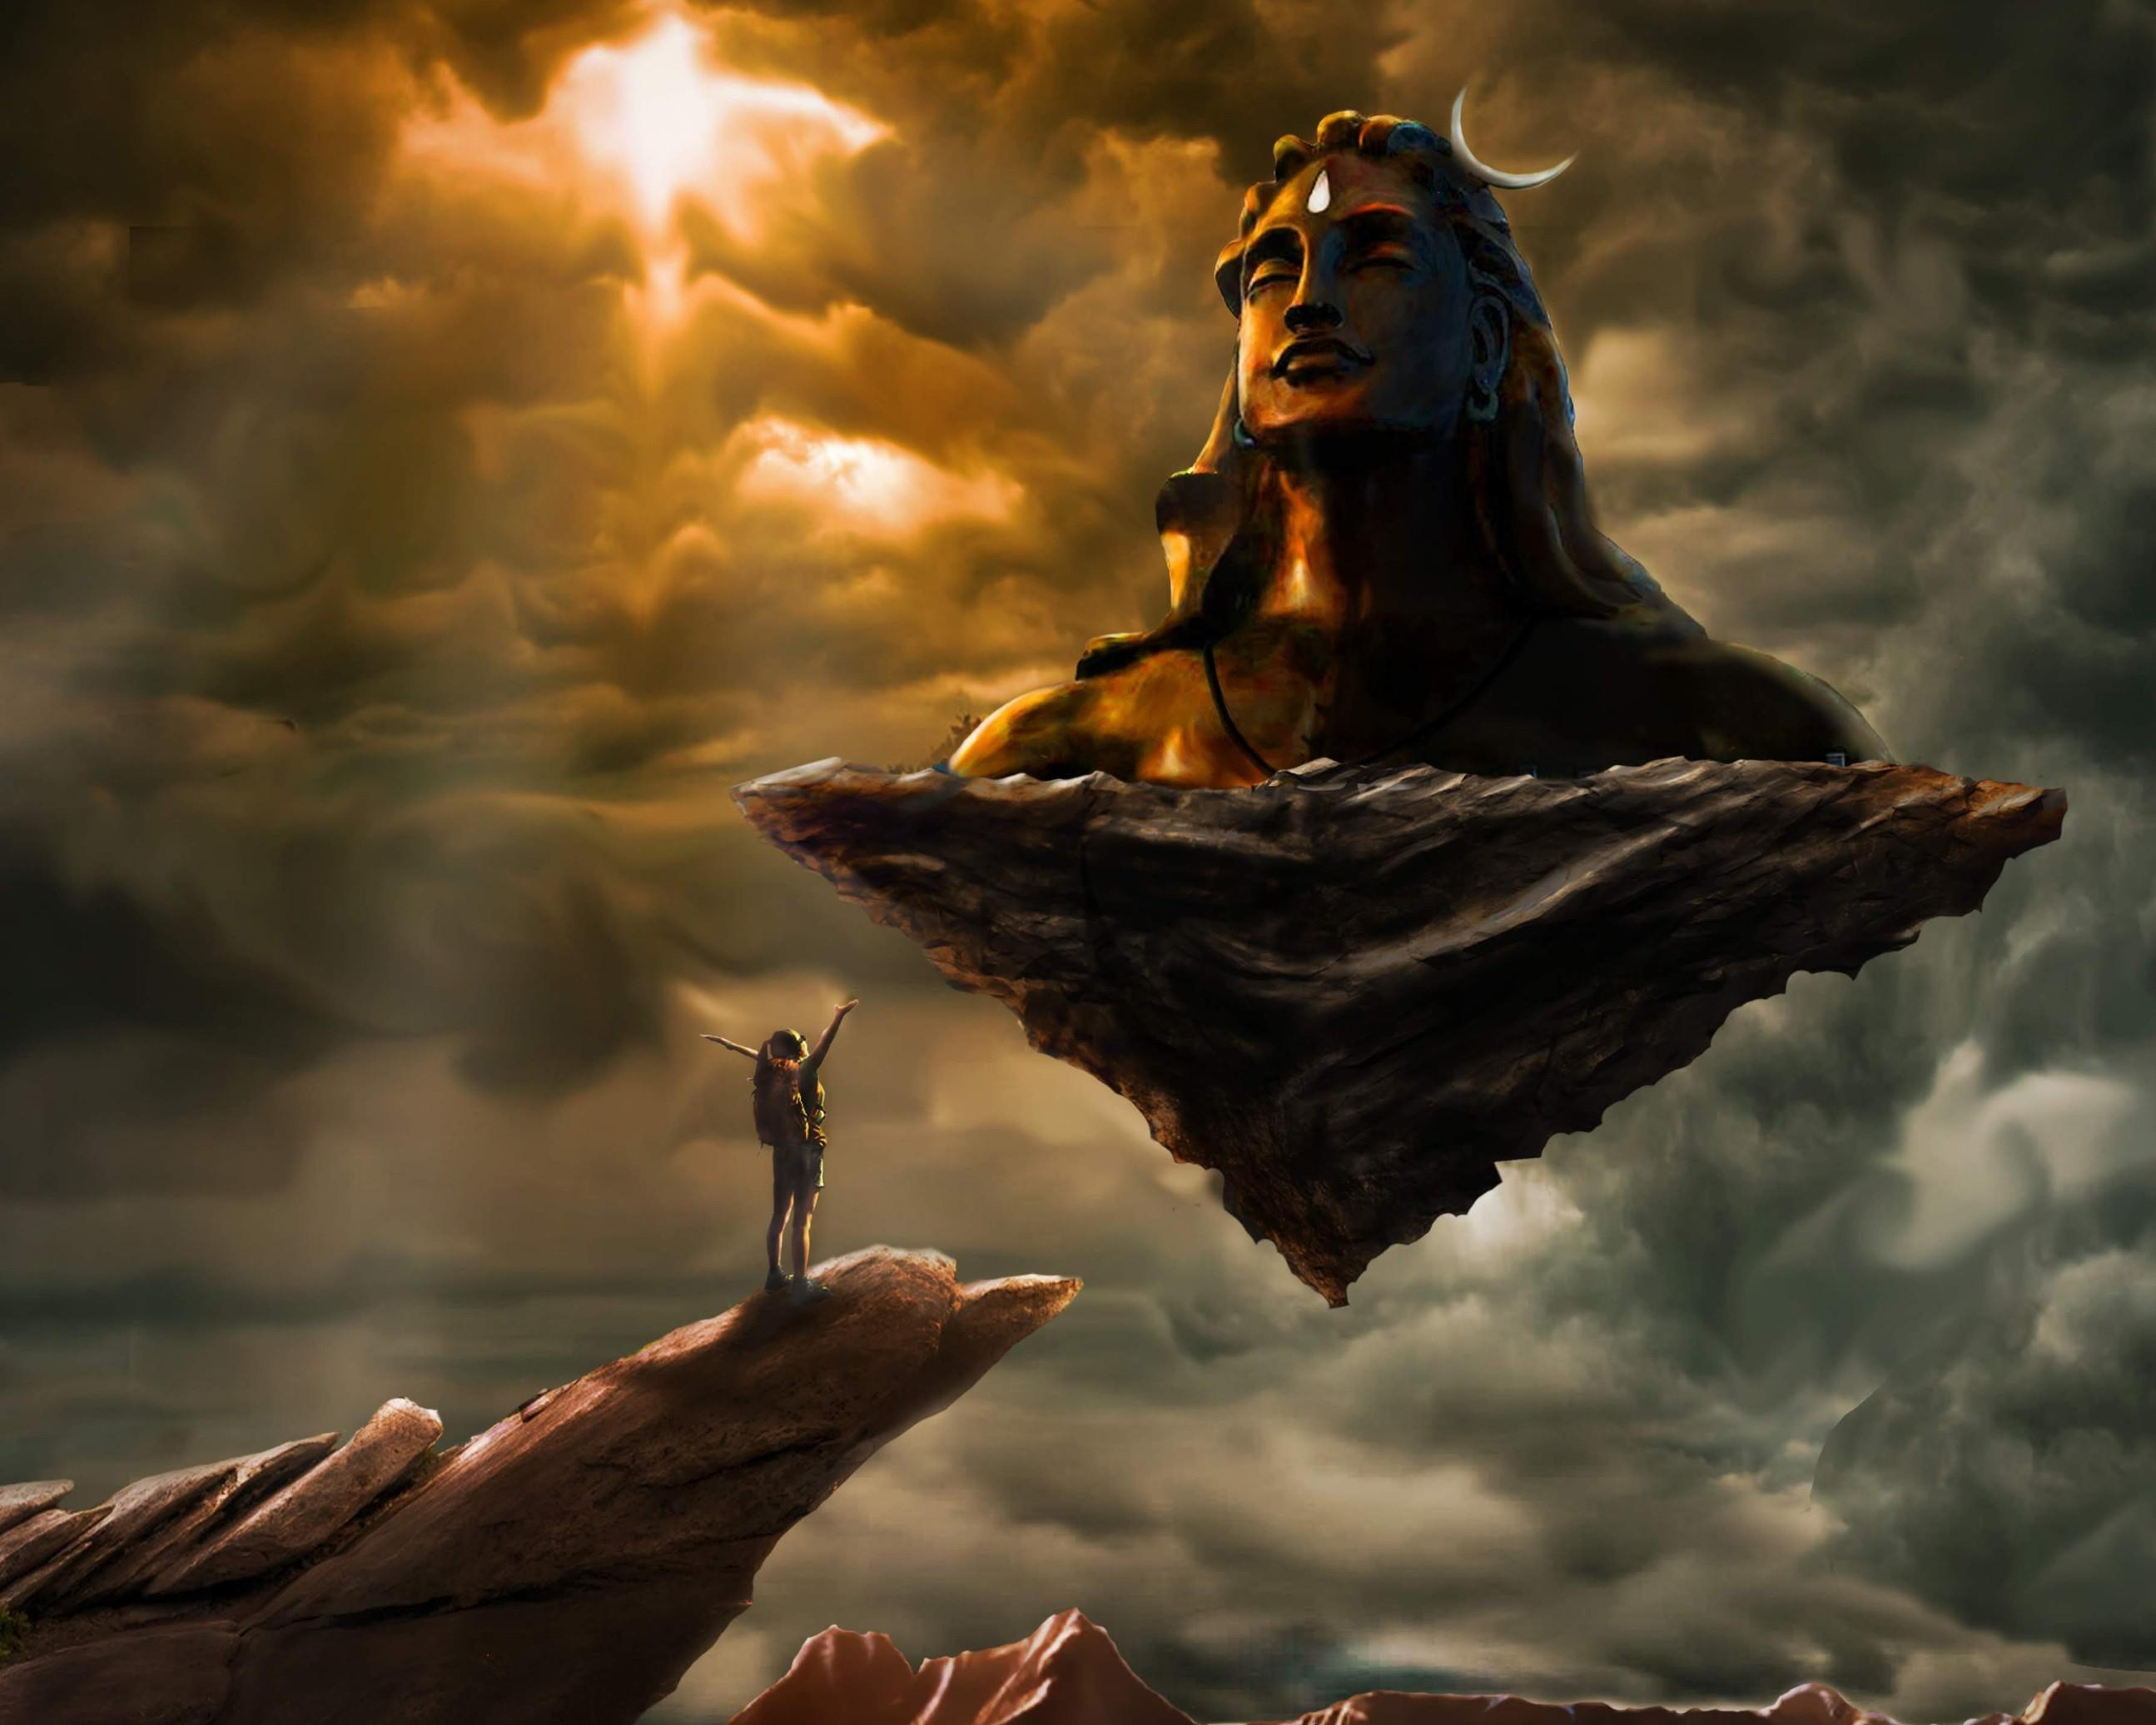 shiva 4K wallpapers for your desktop or mobile screen free